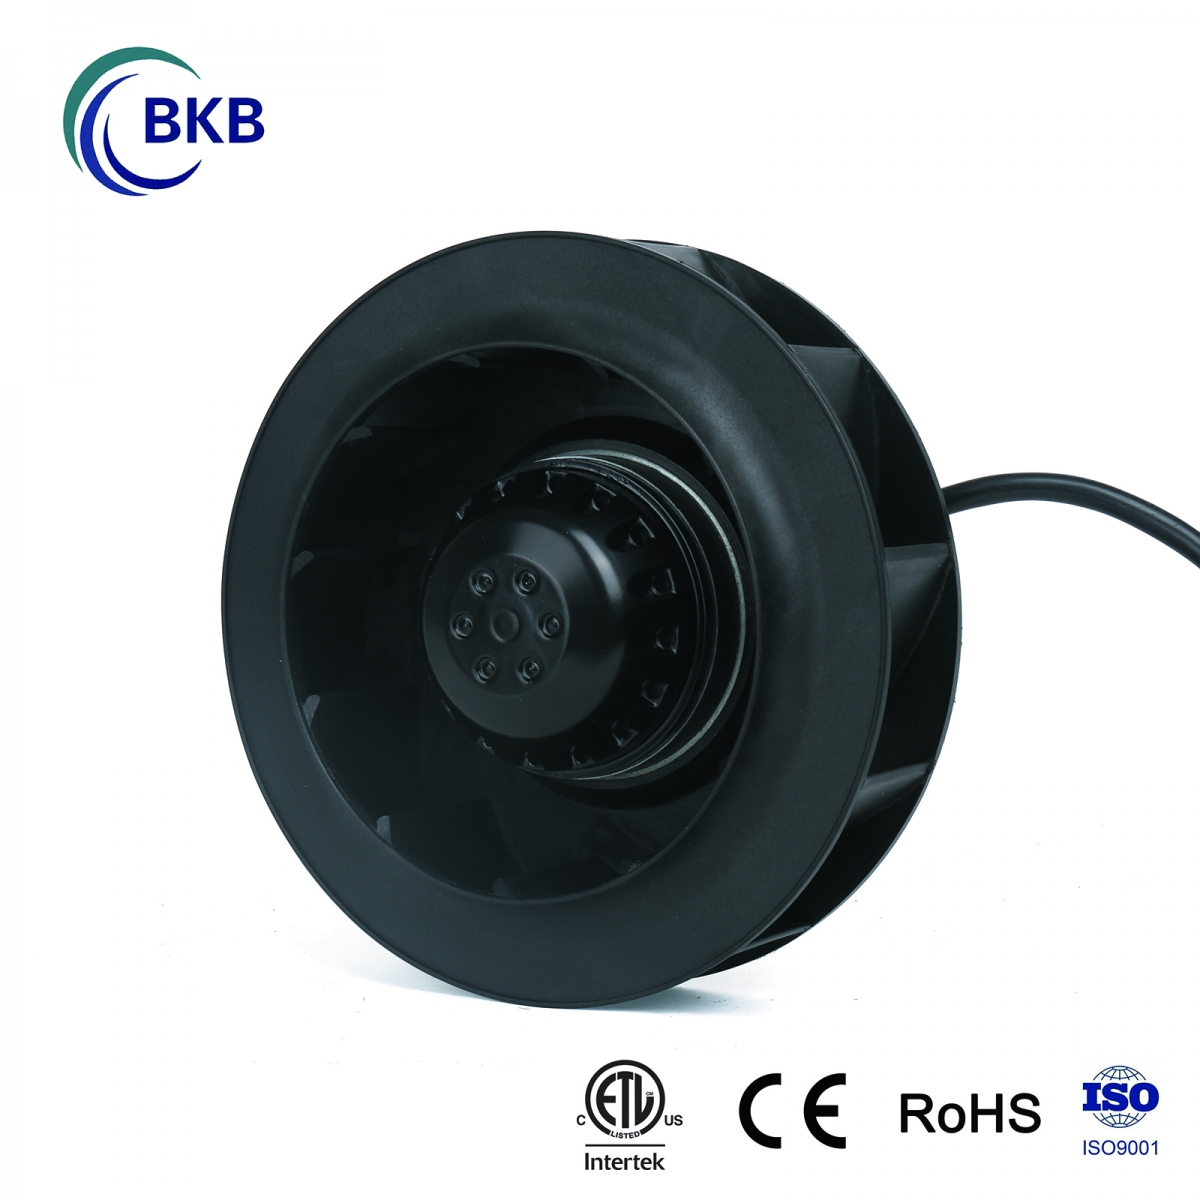 Centrifugal fans -The bearing box is composed of transmission shaft, bearing and bearing seat-SUNLIGHT BLOWER,Centrifugal Fans, Inline Fans,Motors,Backward curved centrifugal fans ,Forward curved centrifugal fans ,inlet fans, EC fans